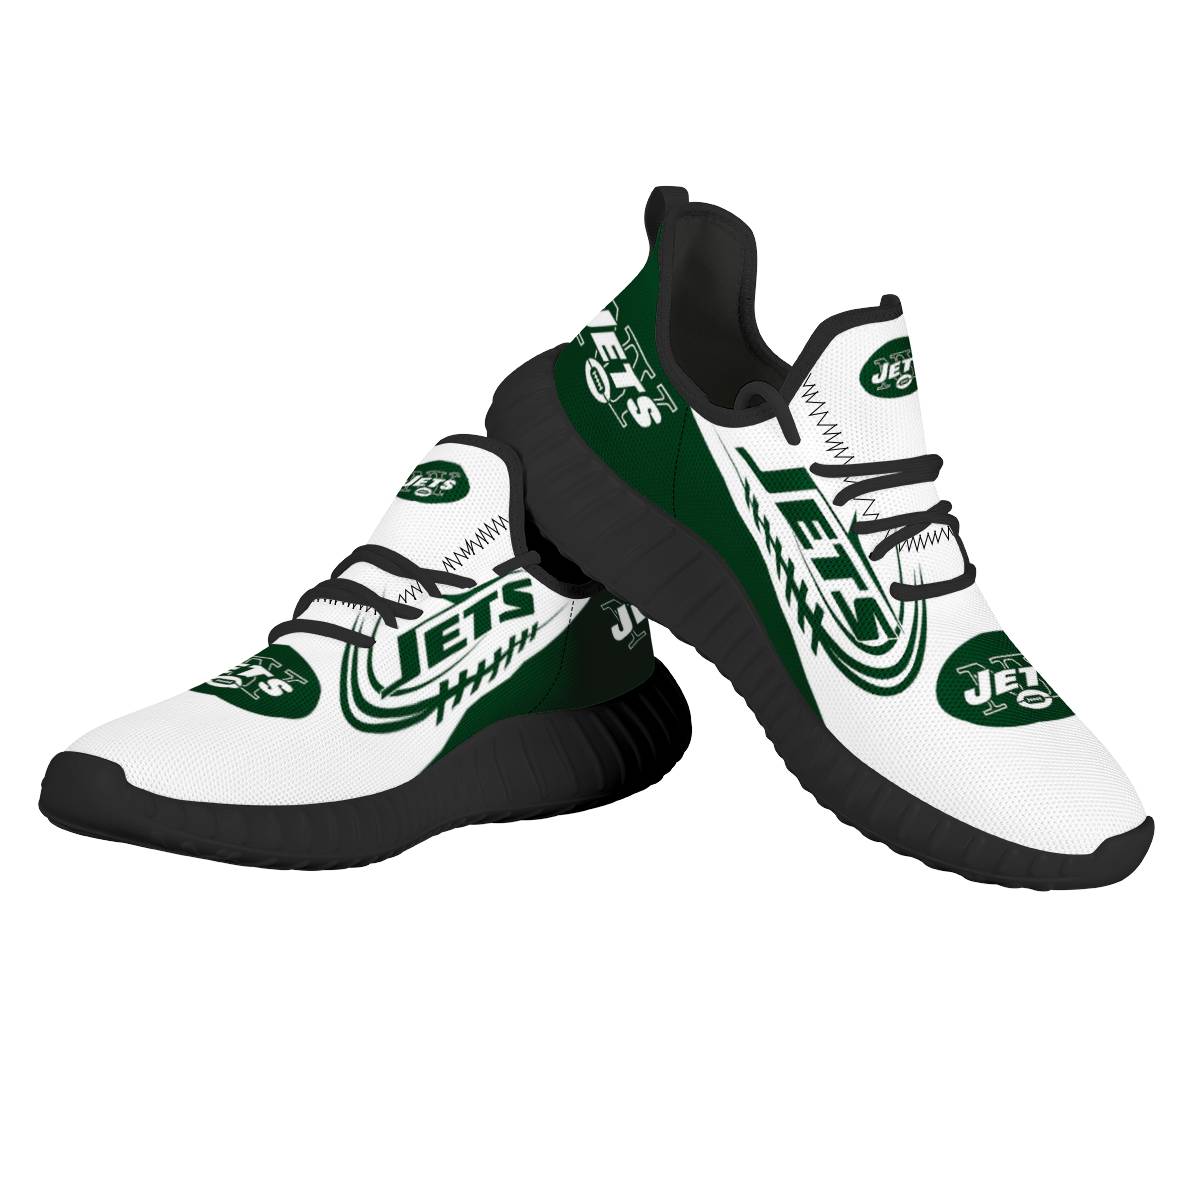 Women's NFL New York Jets Mesh Knit Sneakers/Shoes 002